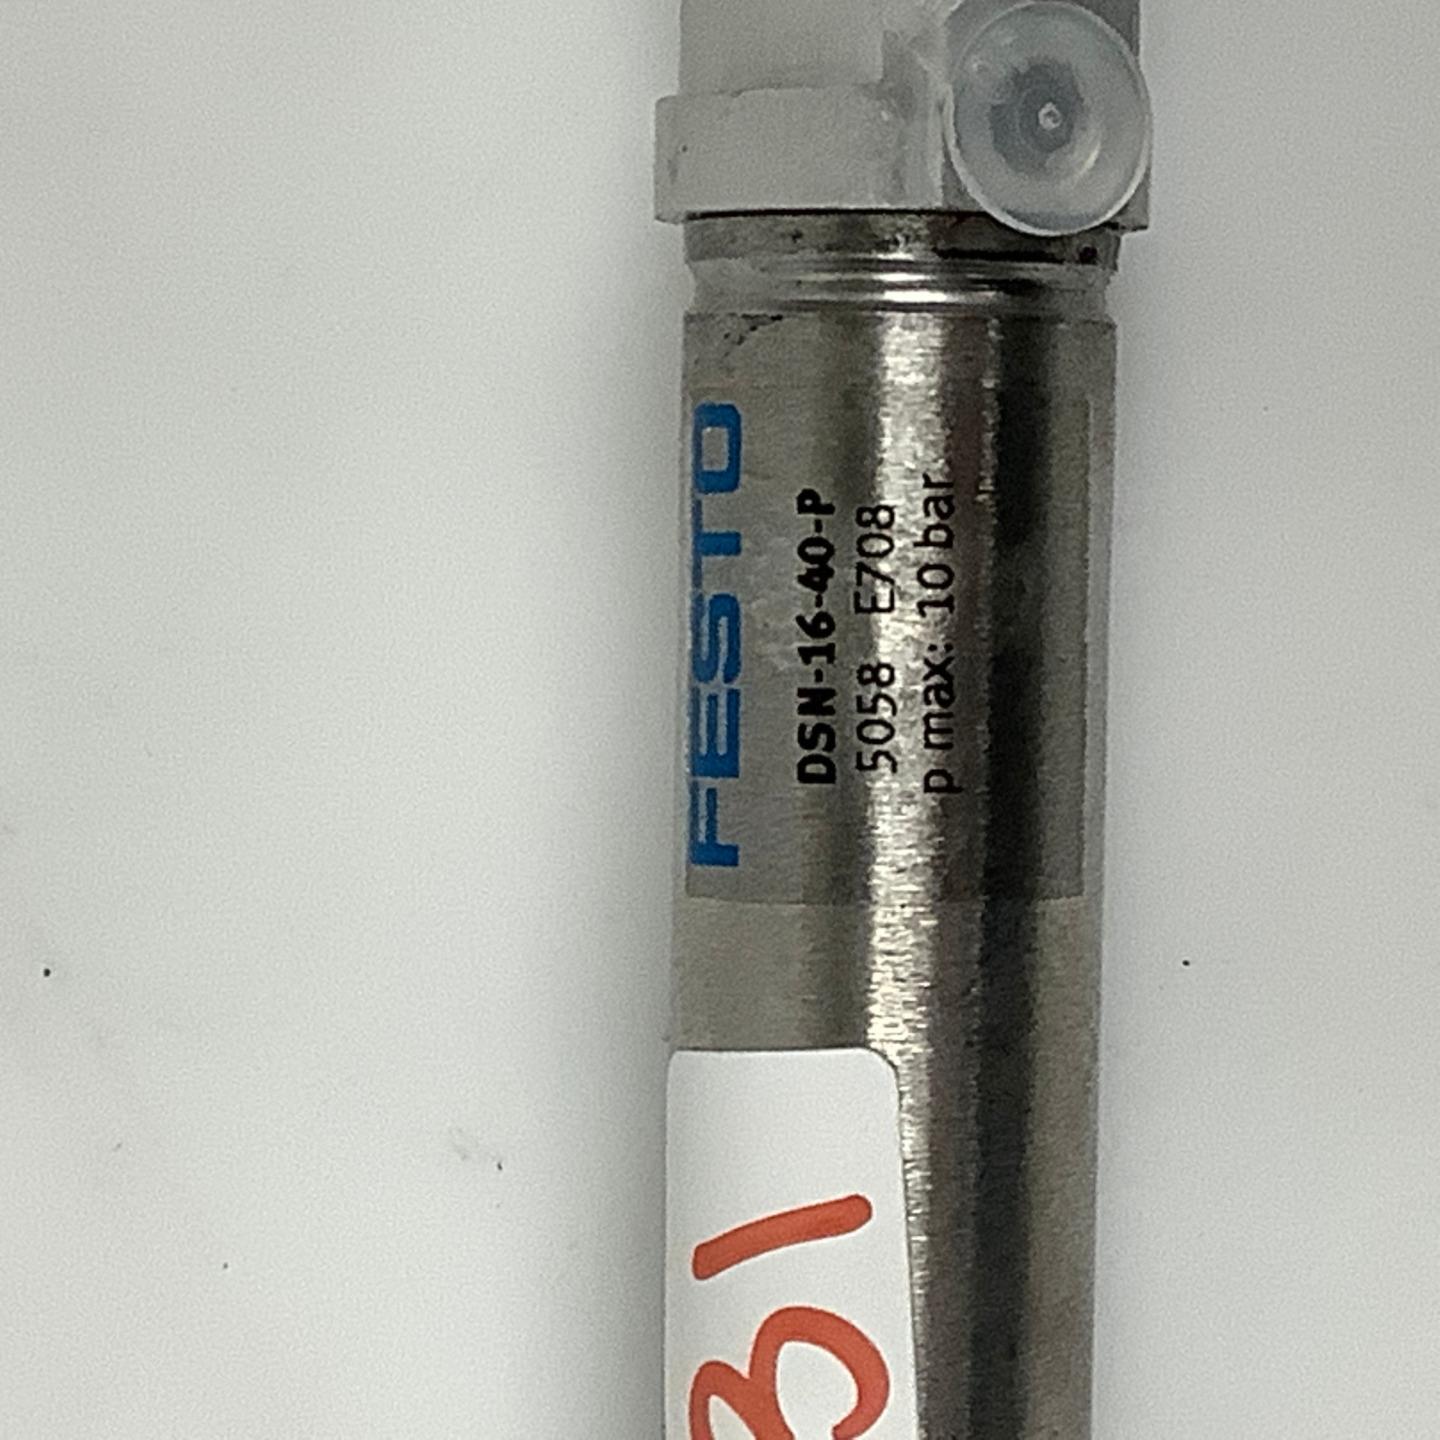 FESTO PNEUMATIC CYLINDER DOUBLE ACTING DSN-16-40-P | eBay